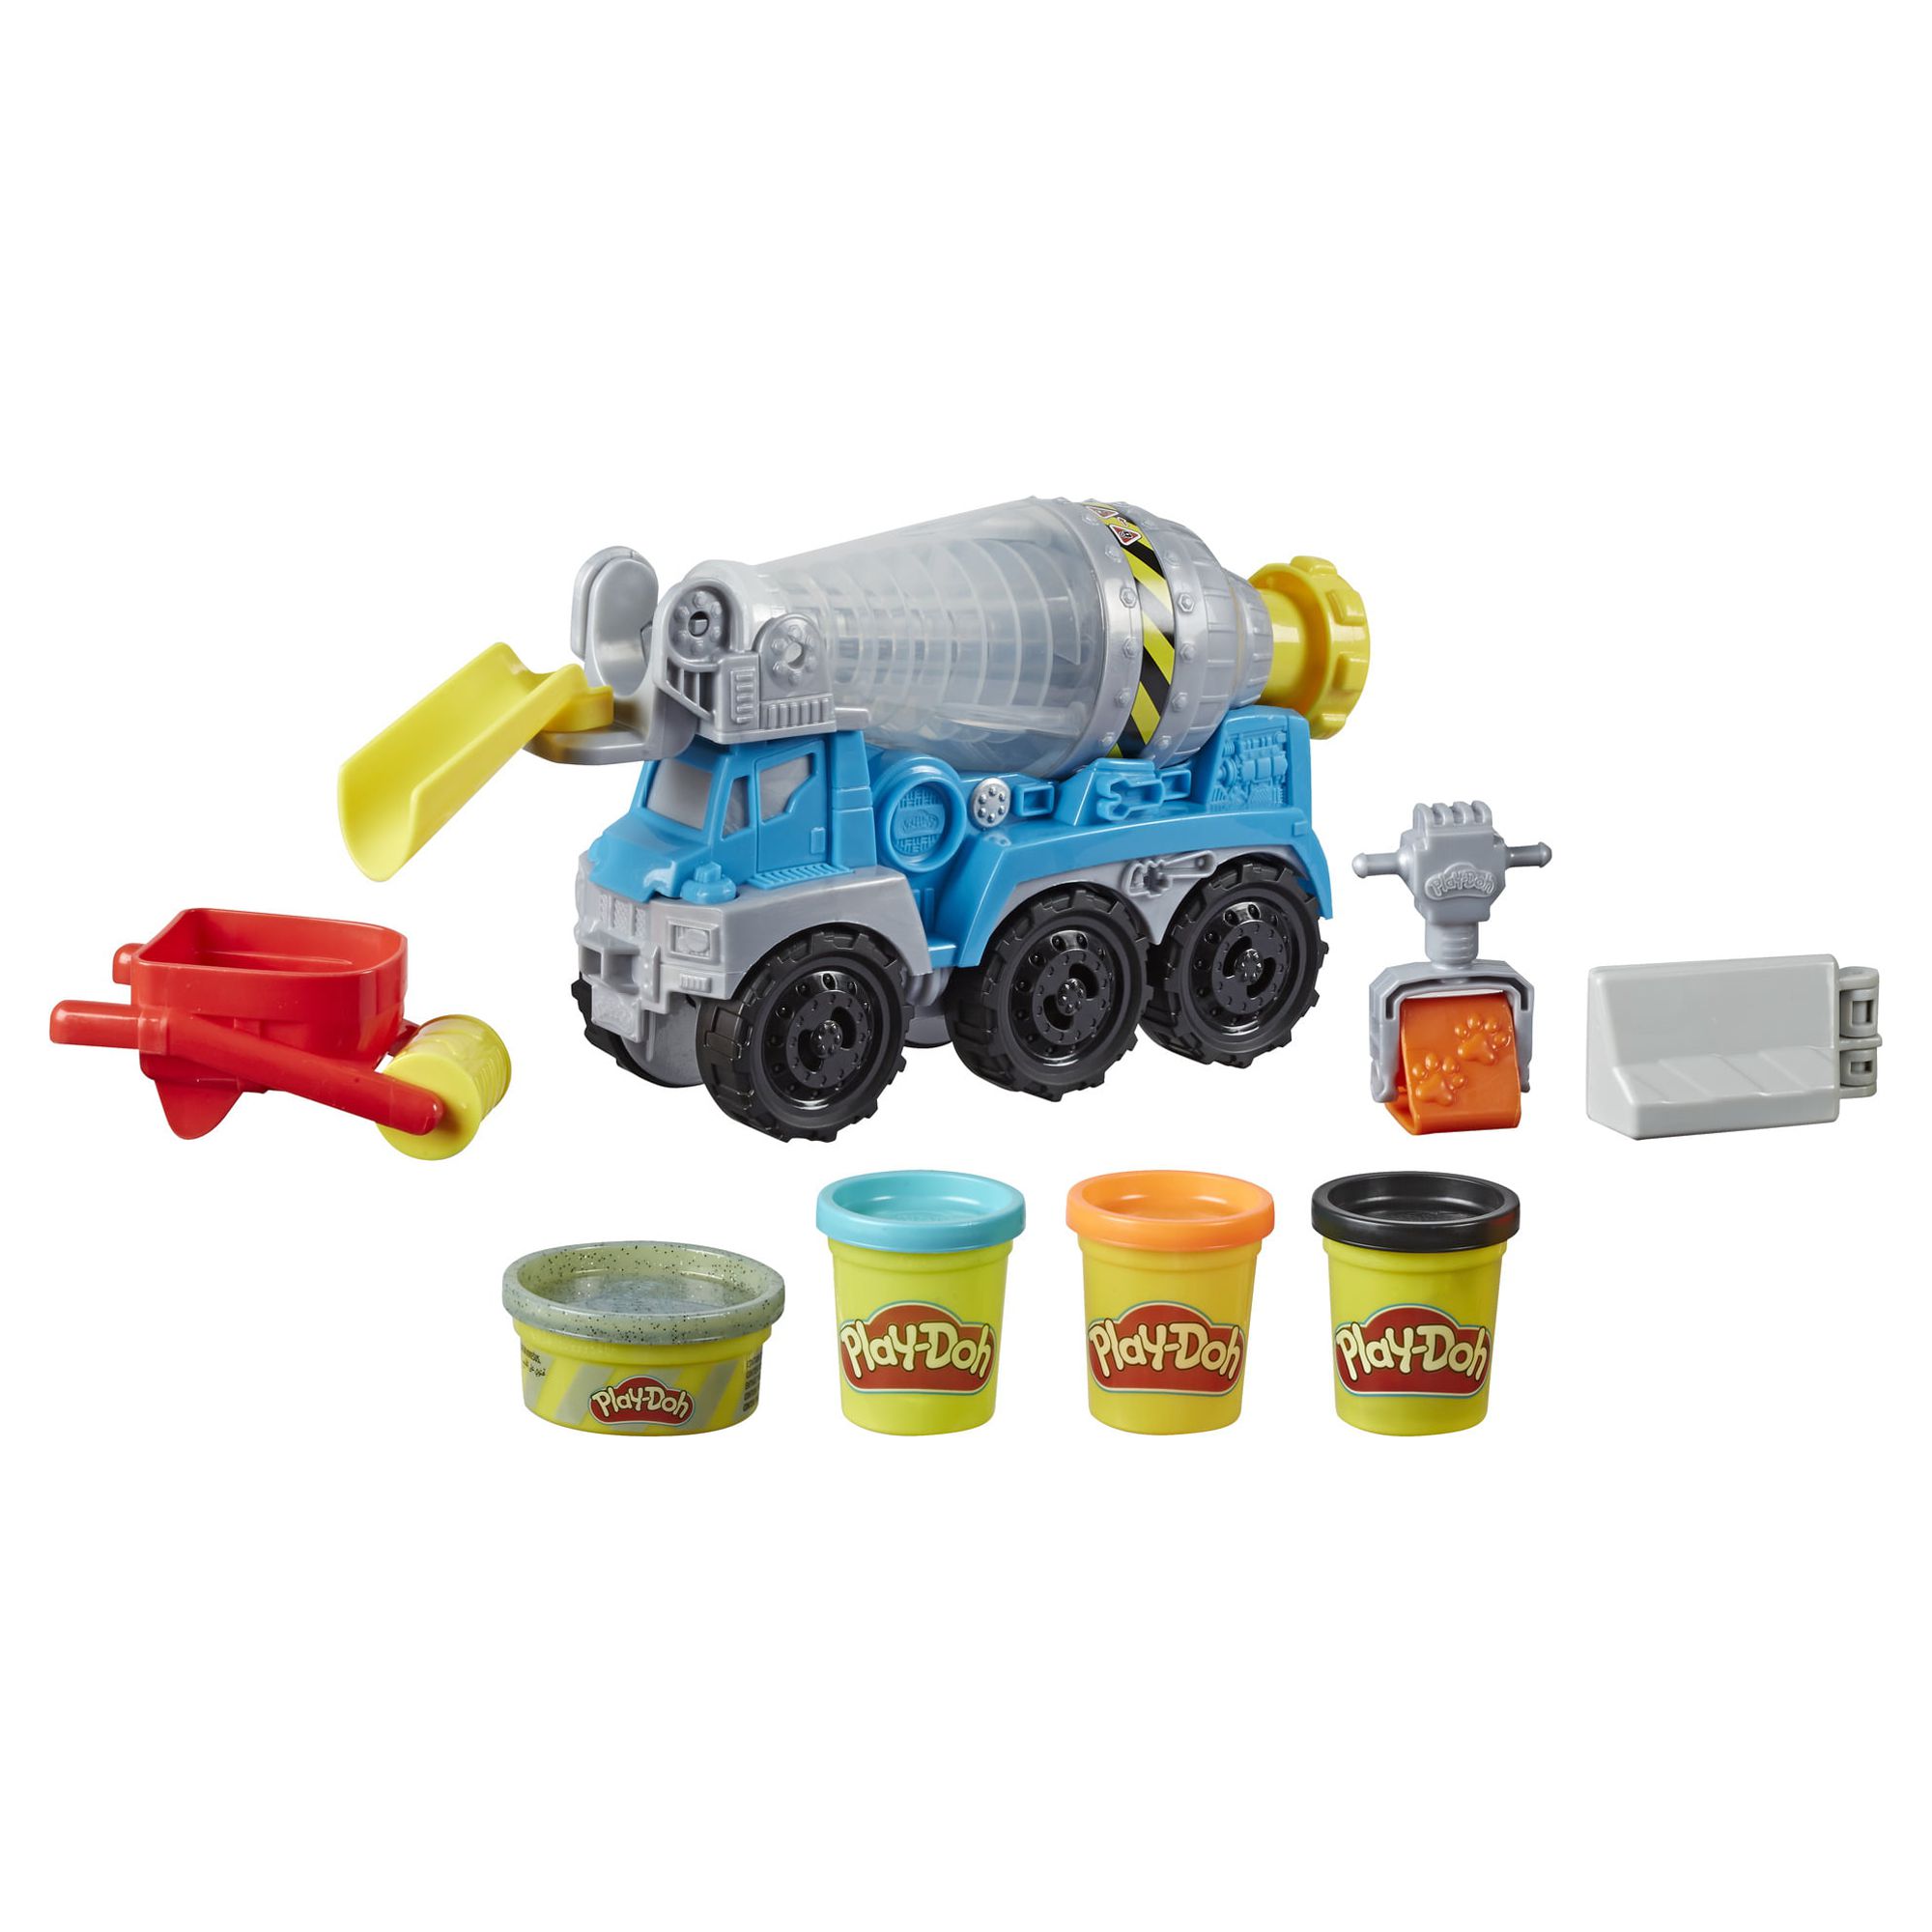 Play-Doh Wheels Cement Truck Play Dough Set - 4 Color (4 Piece) - image 4 of 9